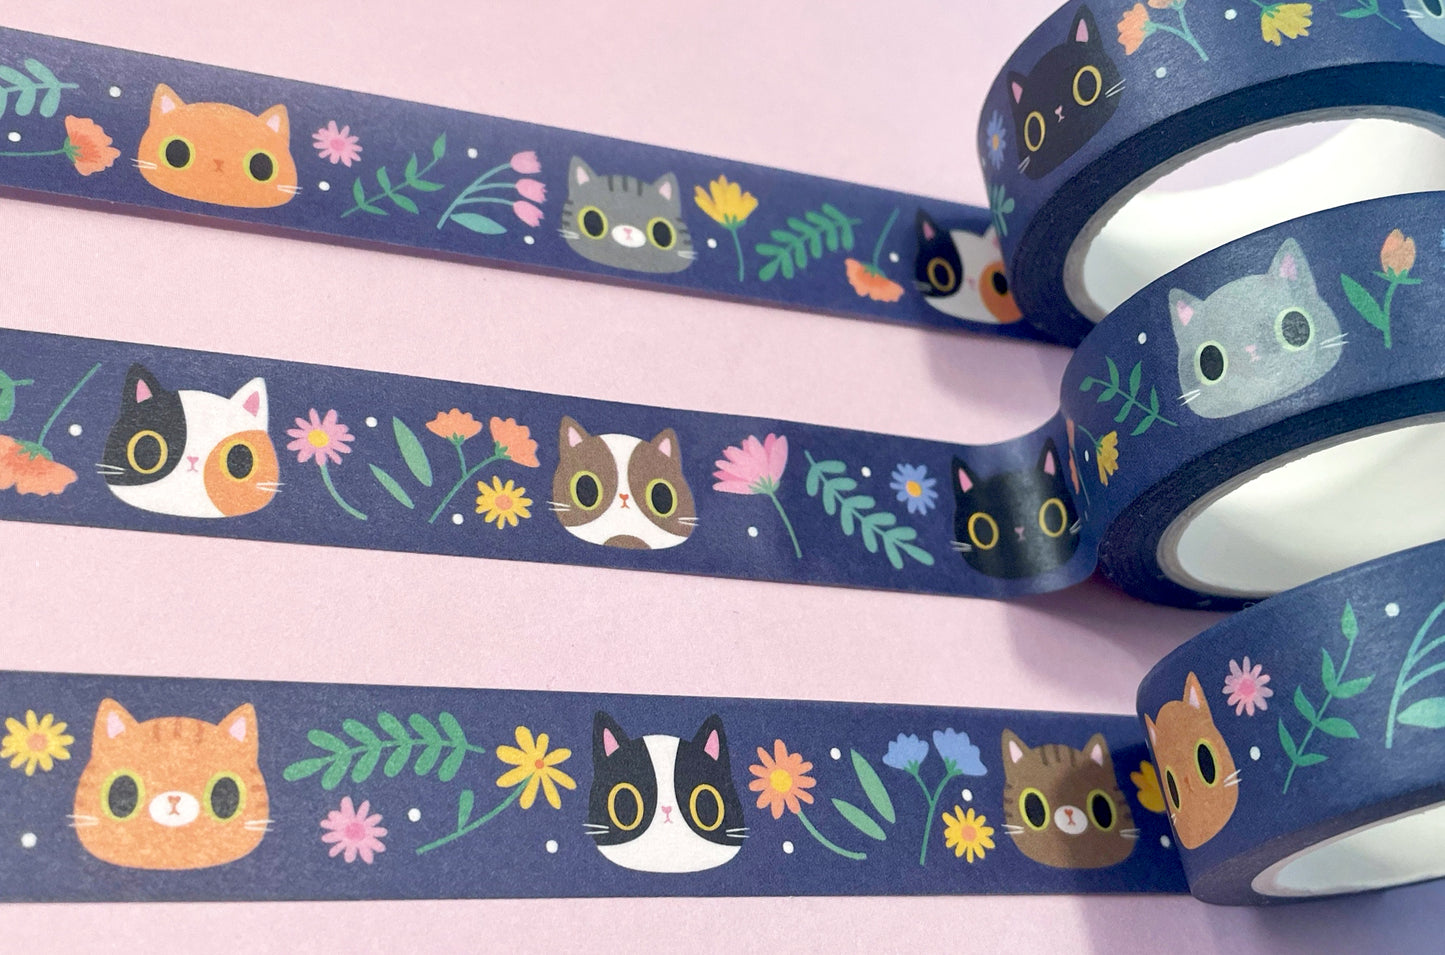 Wildflower Kawaii Washi Tape - Super cute stationery for cat lovers